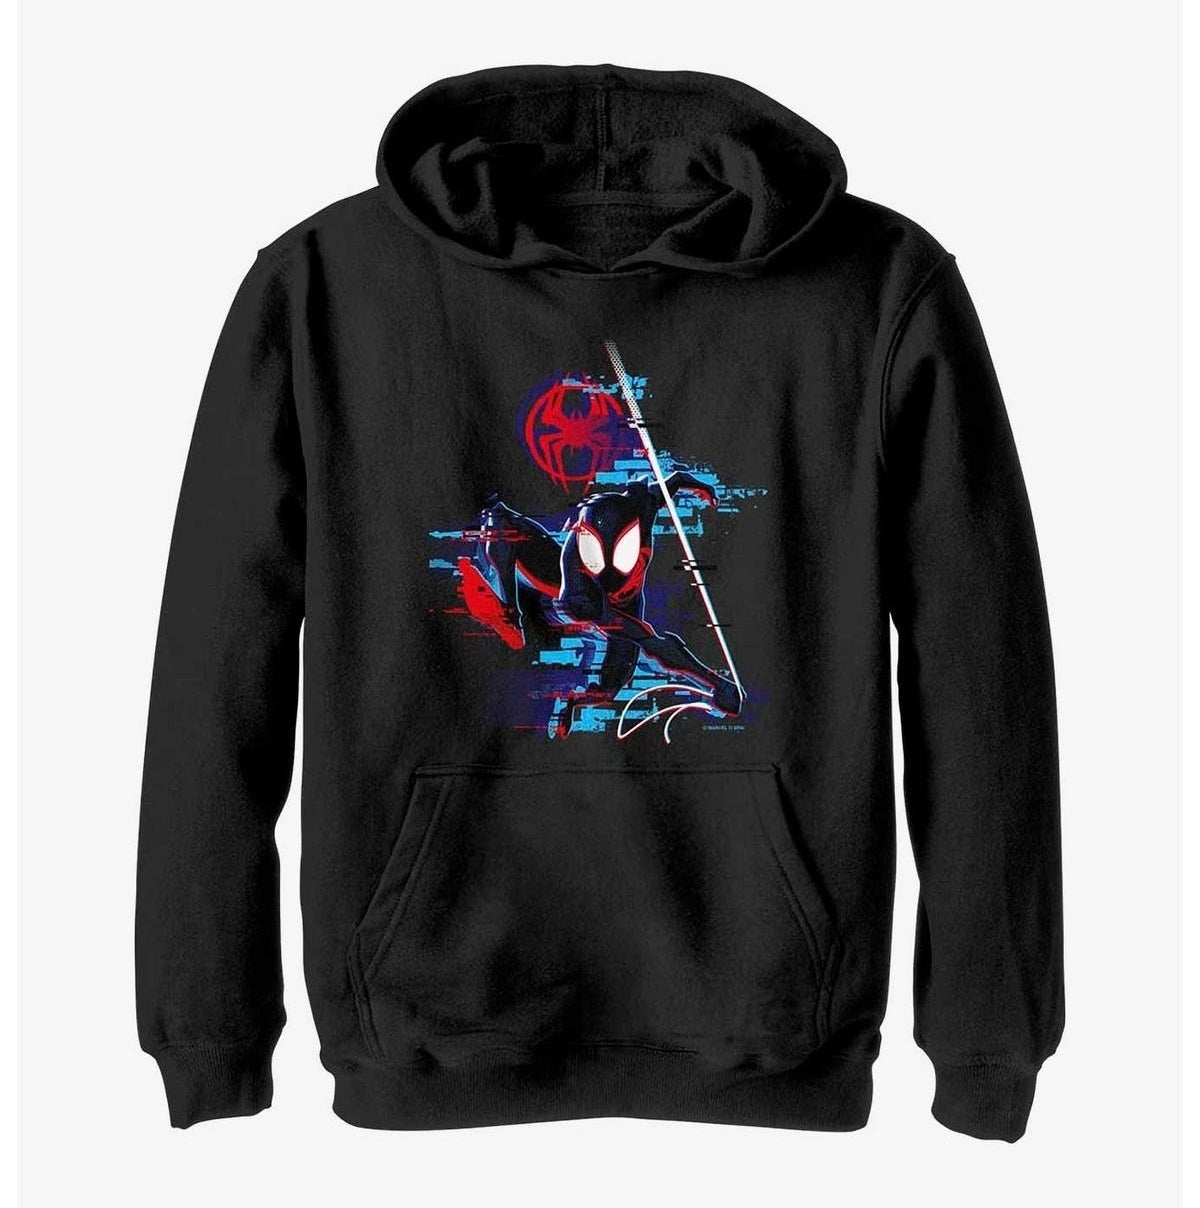 Black hoodie with a graphic of Spider-Man in action. Perfect for fans of superhero merchandise